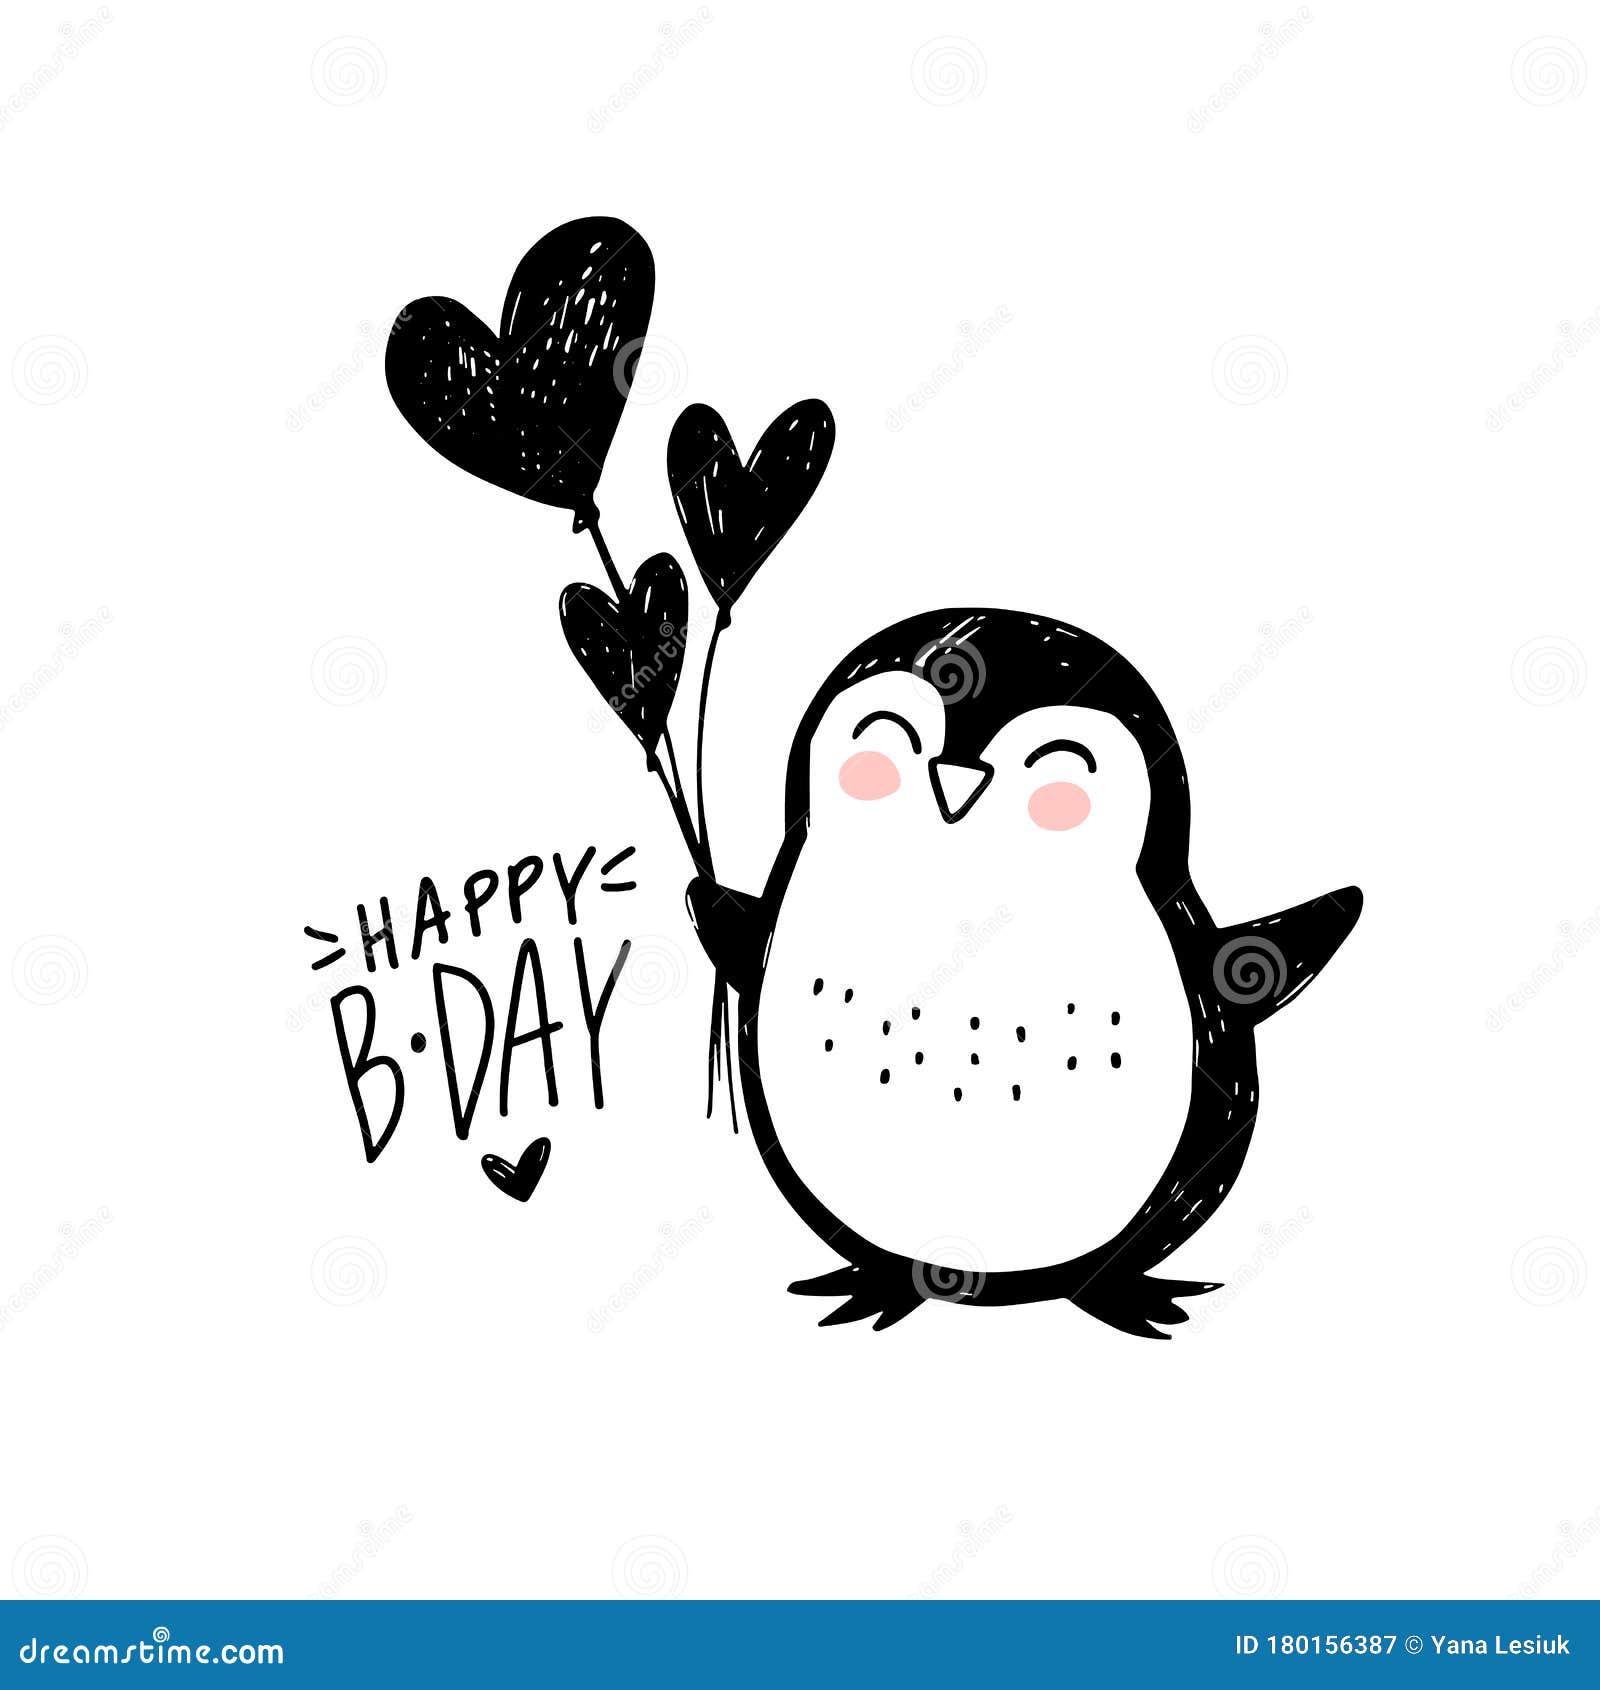 Happy Birthday Greeting Card with Cute Penguin, Ballons and Hand Draw Lettering Inscription. Doodle Cute Animal Stock Vector - Illustration of lettering, holiday: 180156387